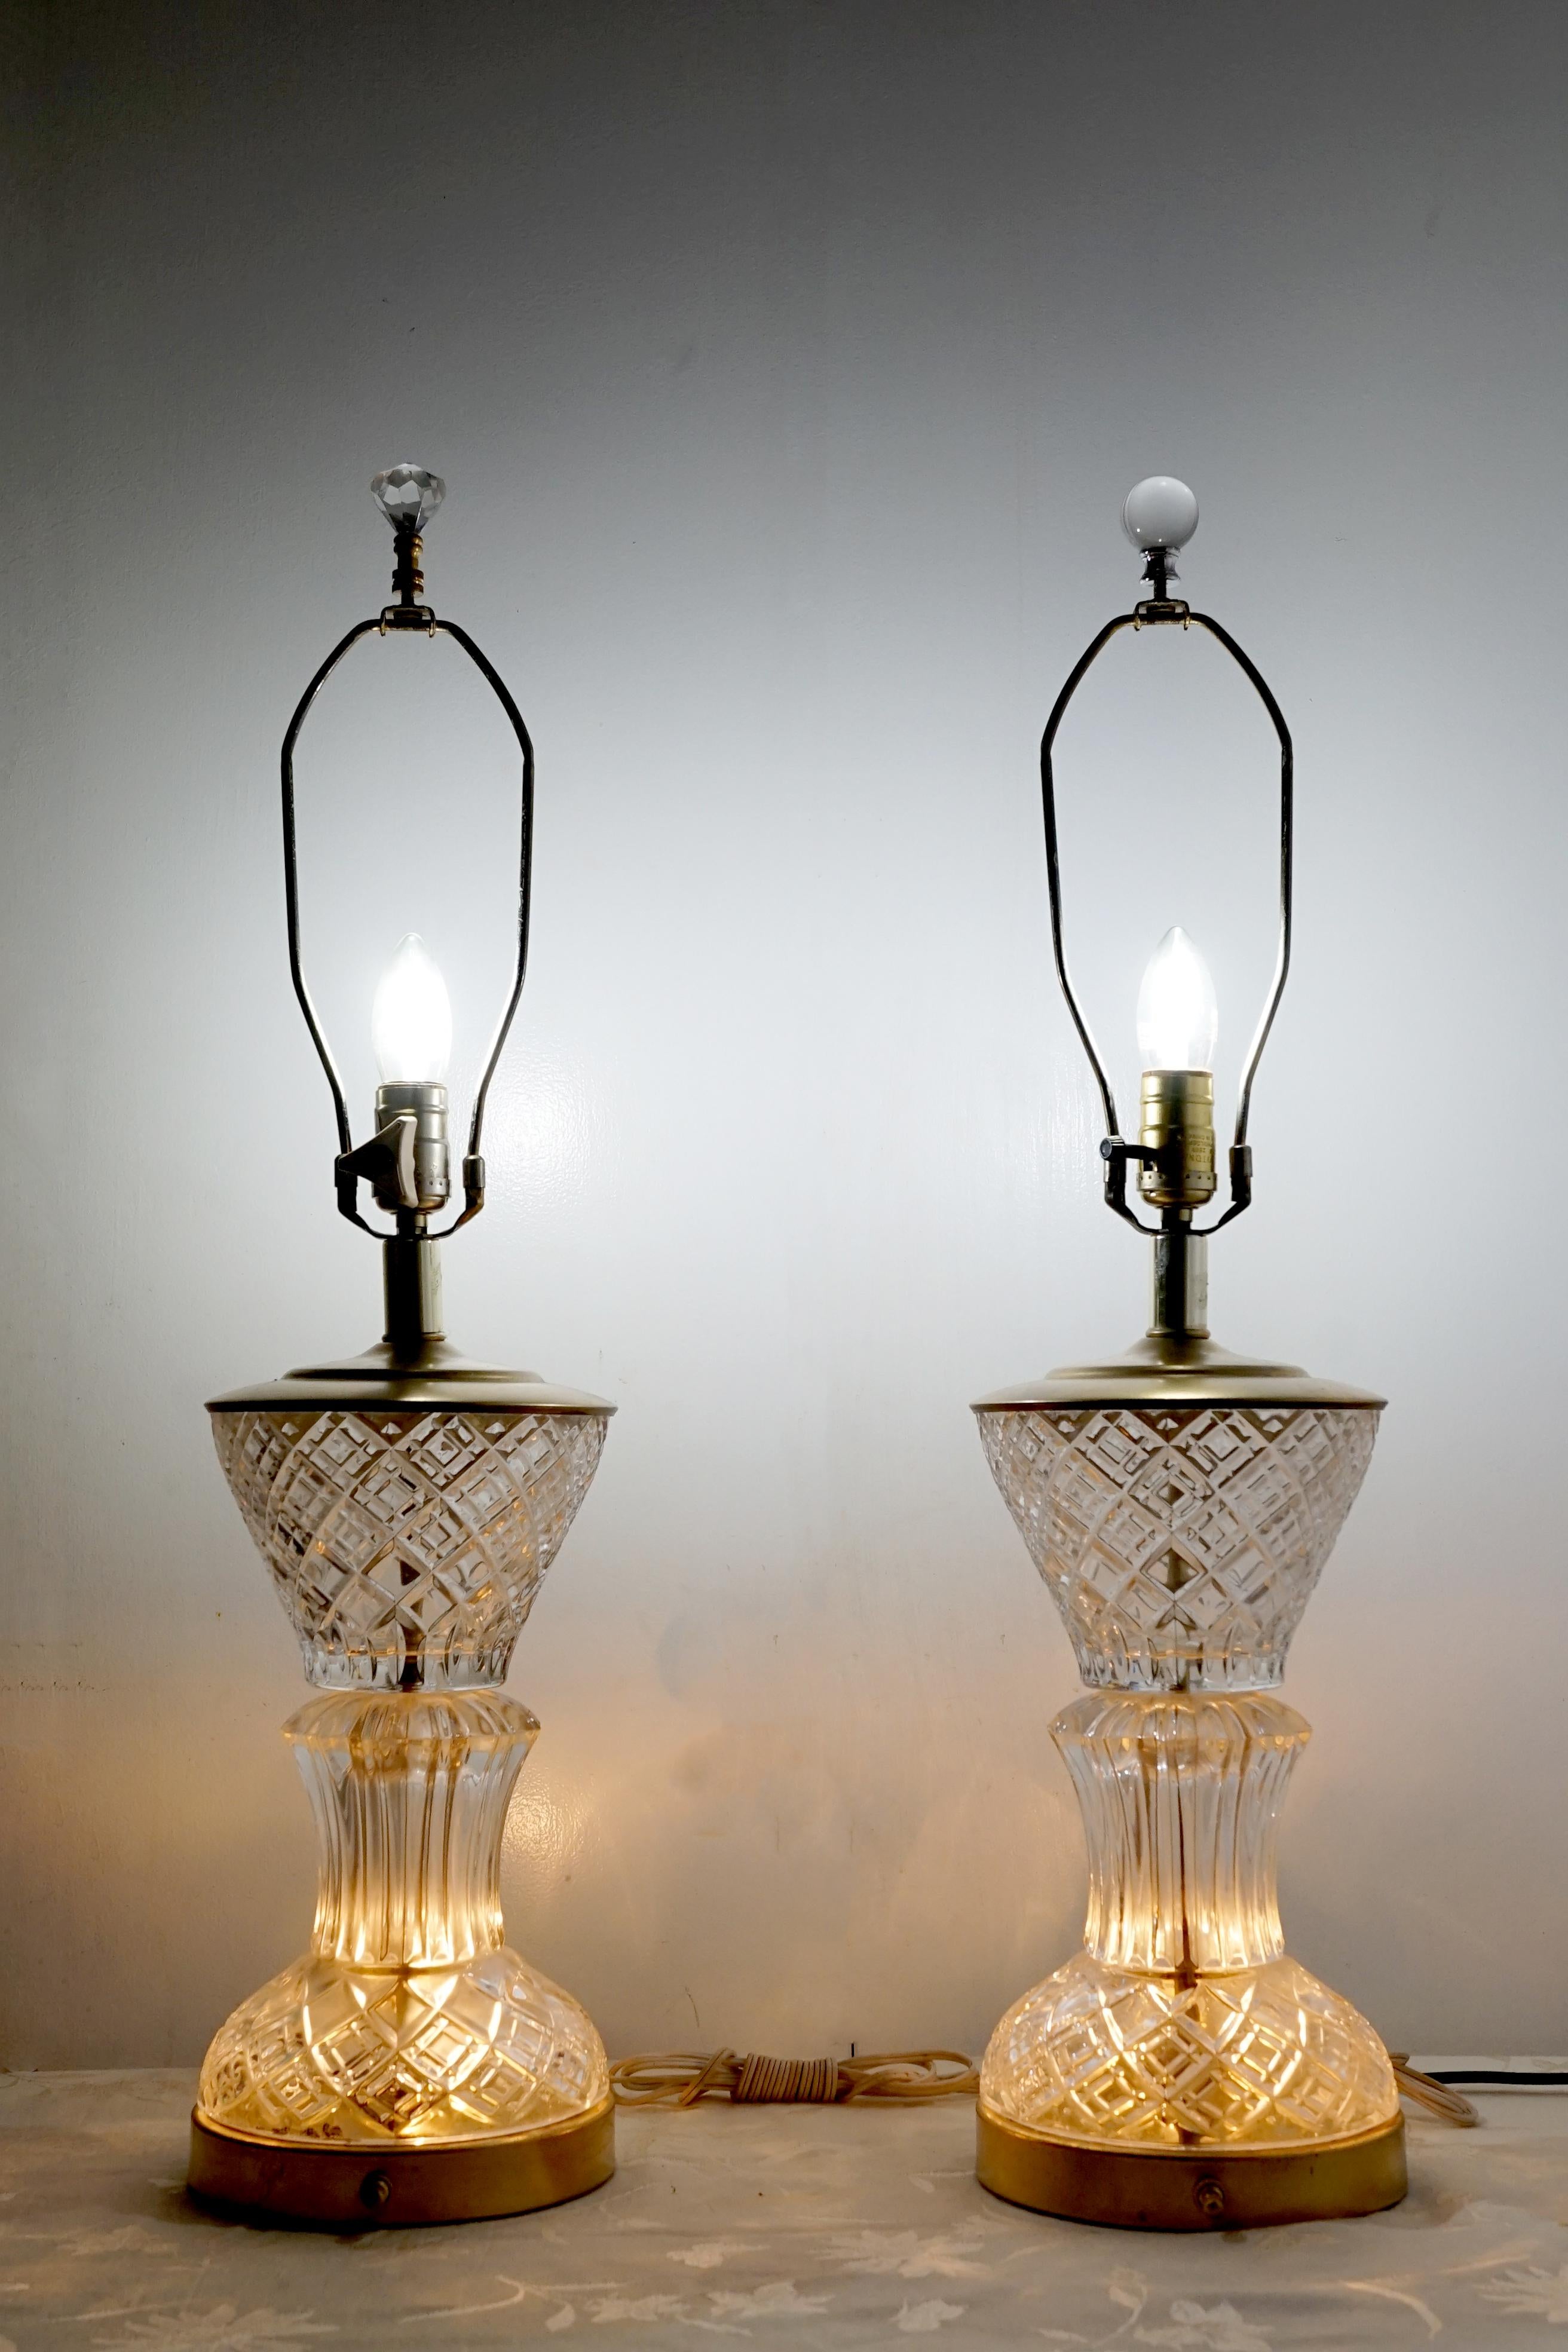 Art Deco shape, style and sparkling faceted cut crystal create a lighting statement in this pair of lamps circa 1925 to 1940. They were produced in the U.S. or France.
The condition is quite good, and the lamps present beautifully. Their appearance